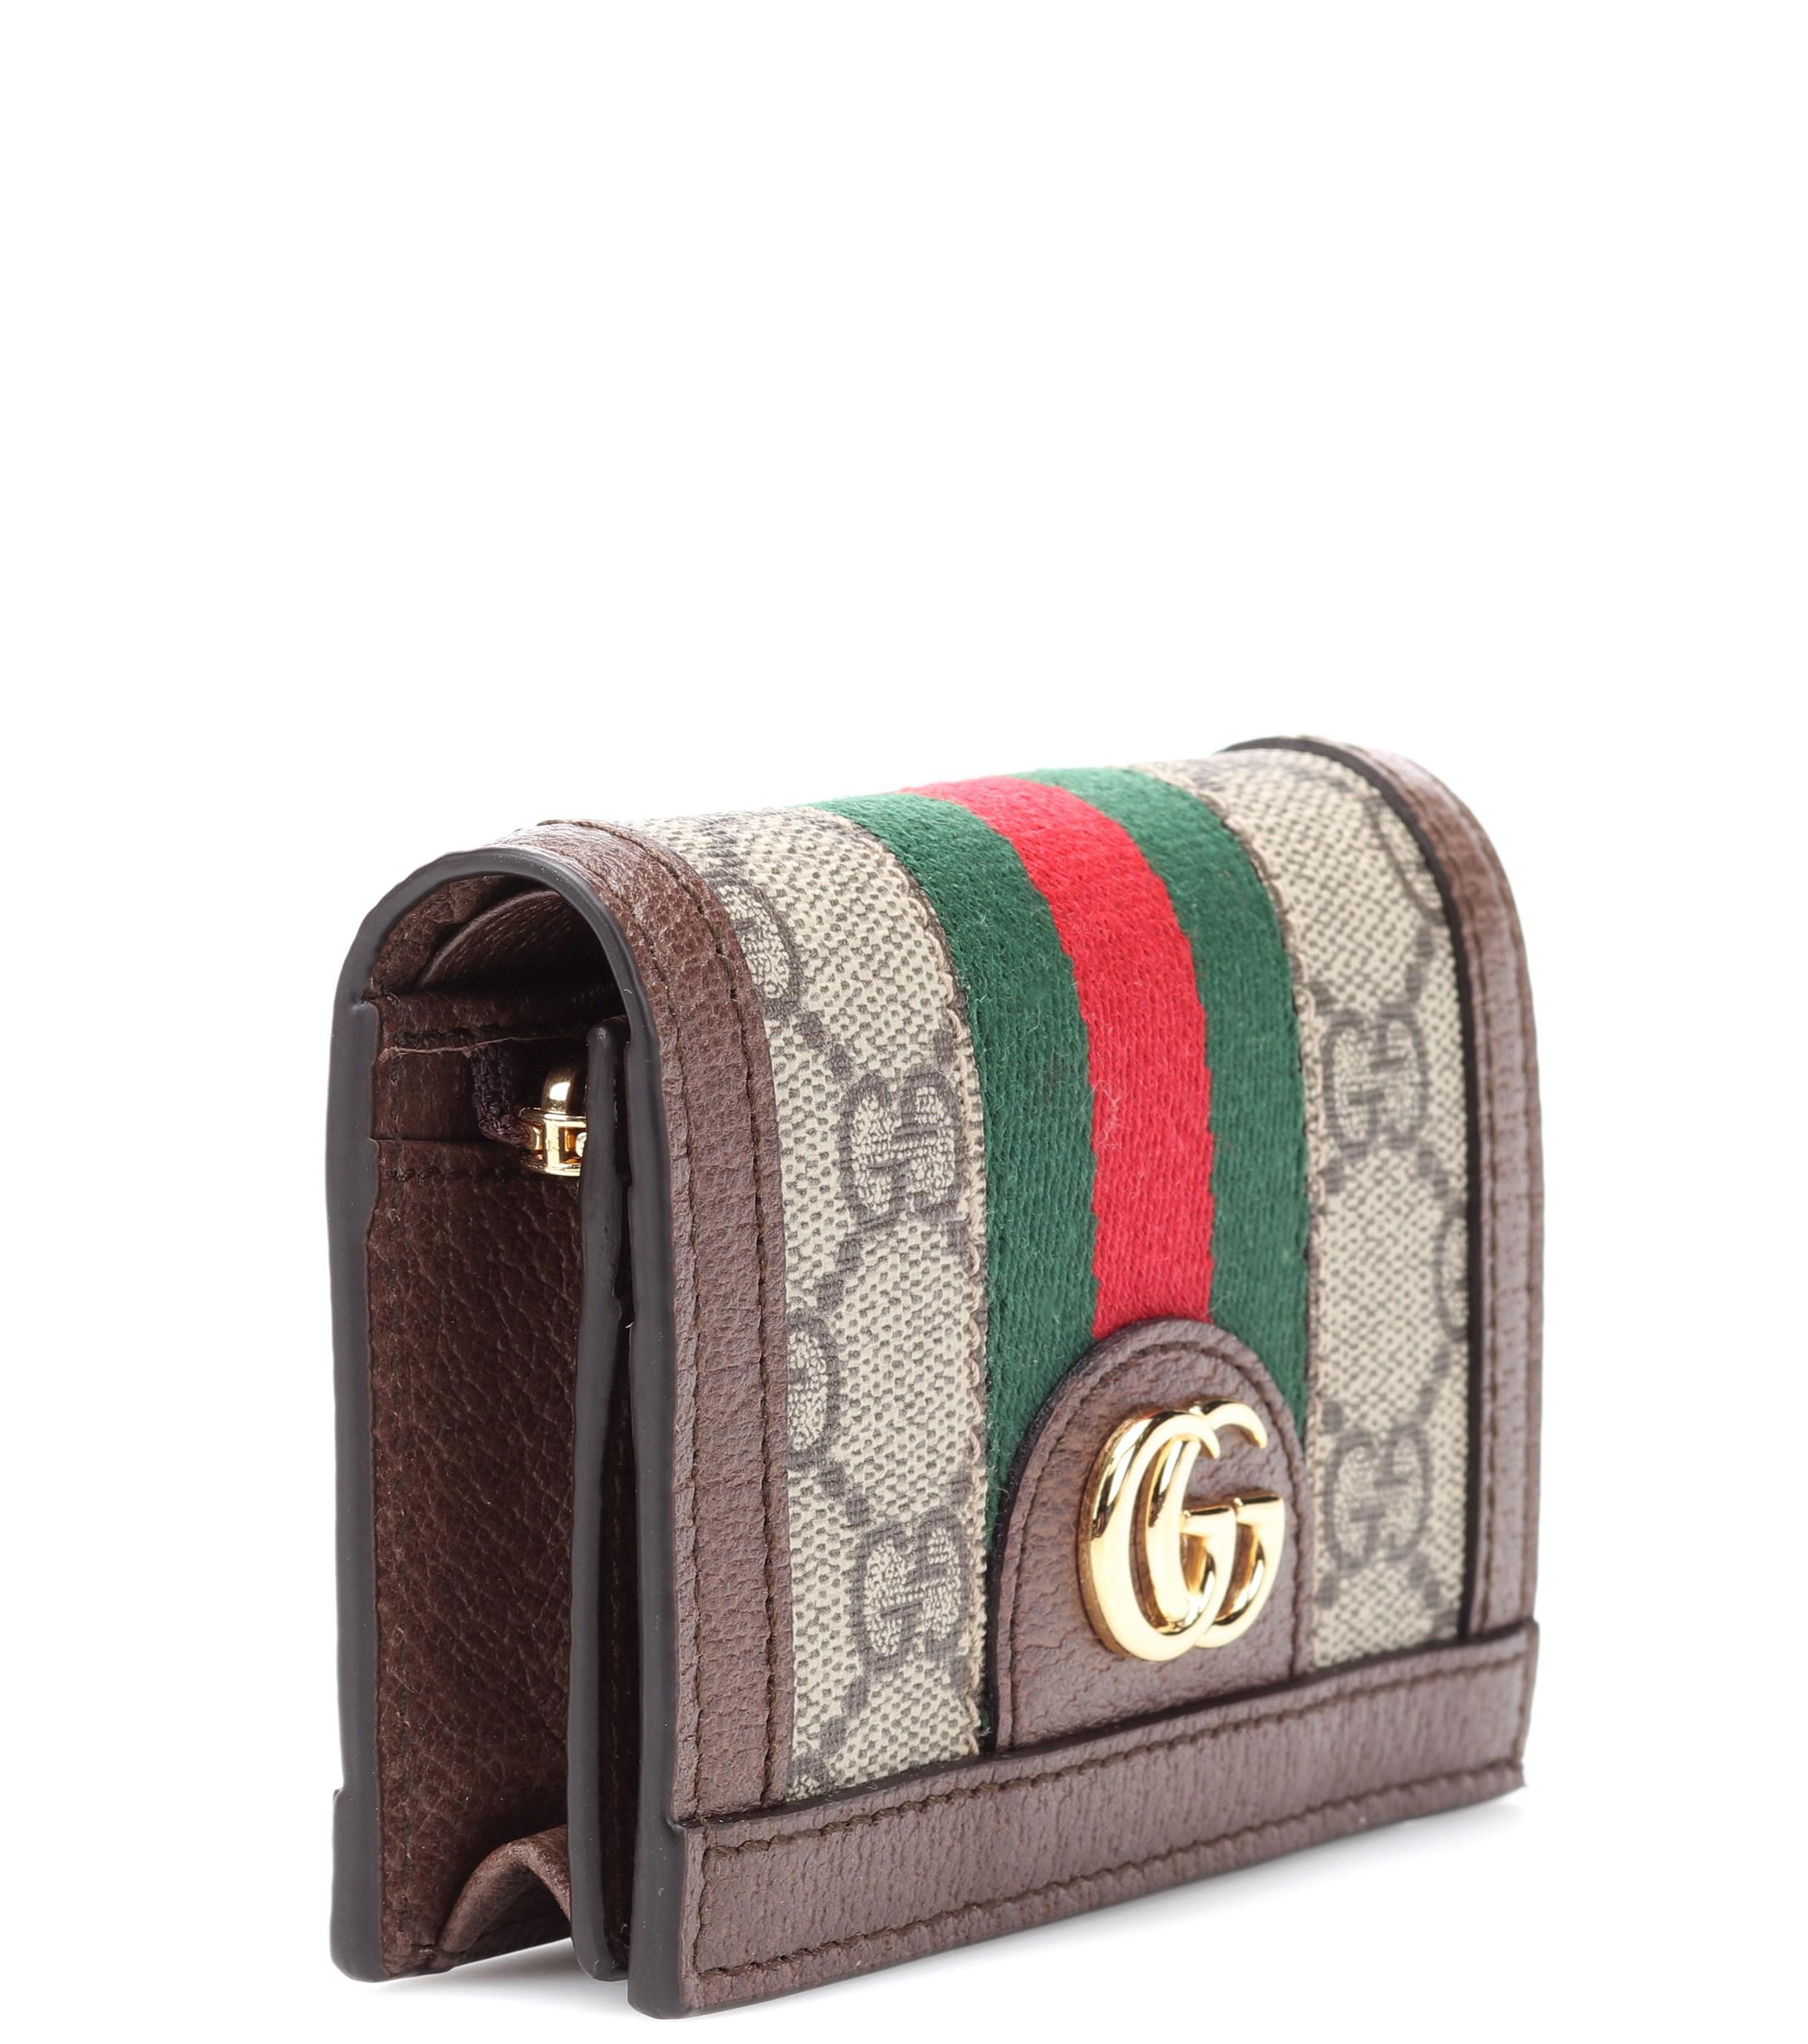 Gucci Ophidia GG Leather Wallet in Brown - Save 24% - Lyst